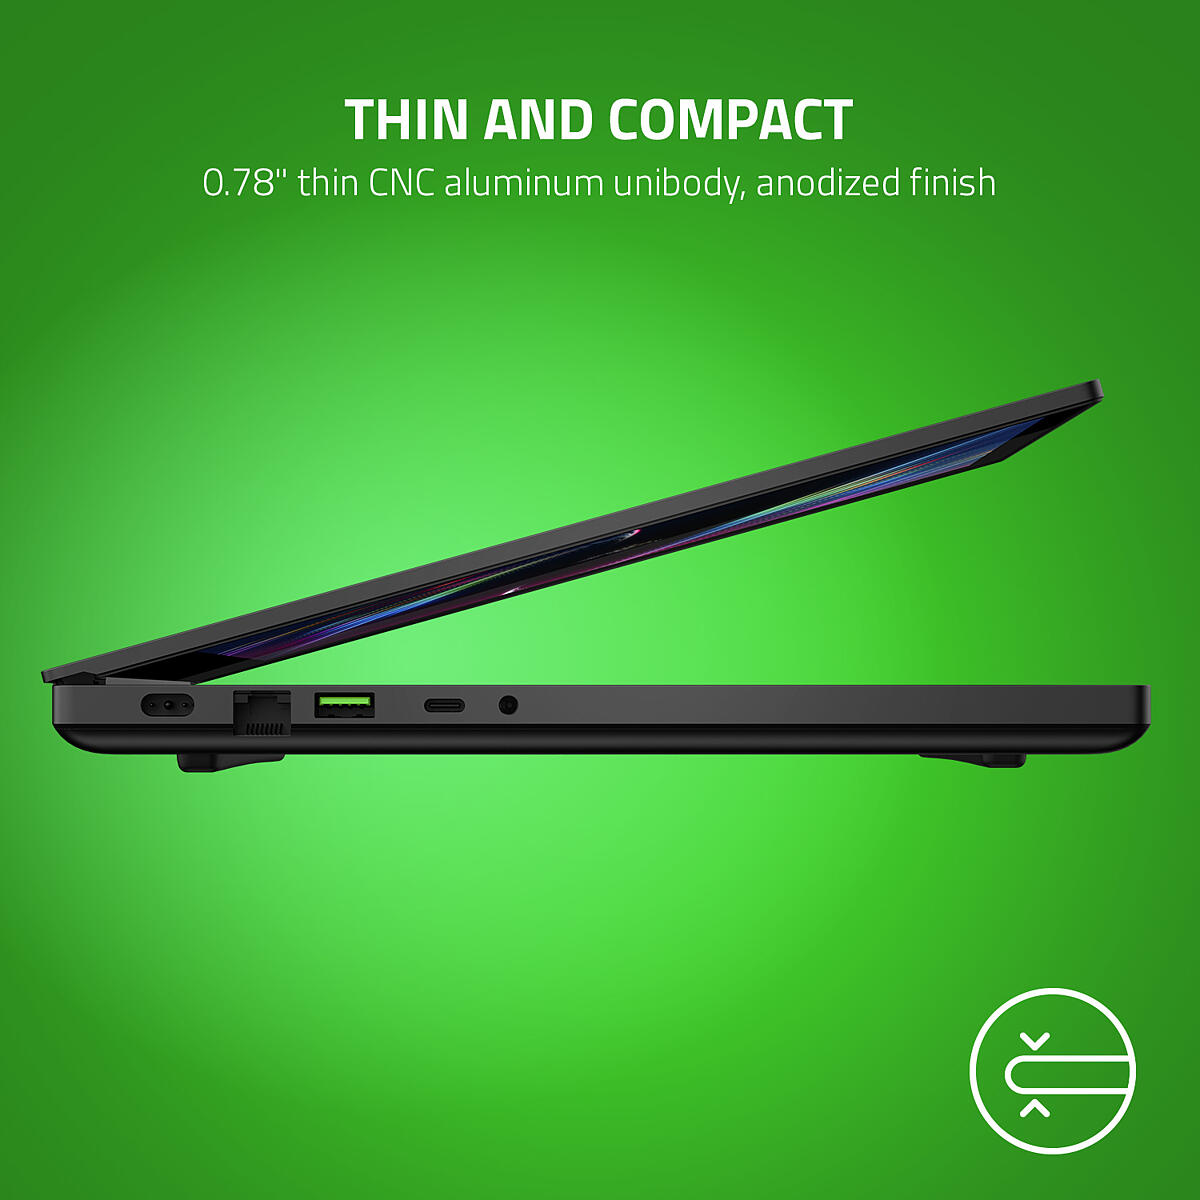 Thin and Compact